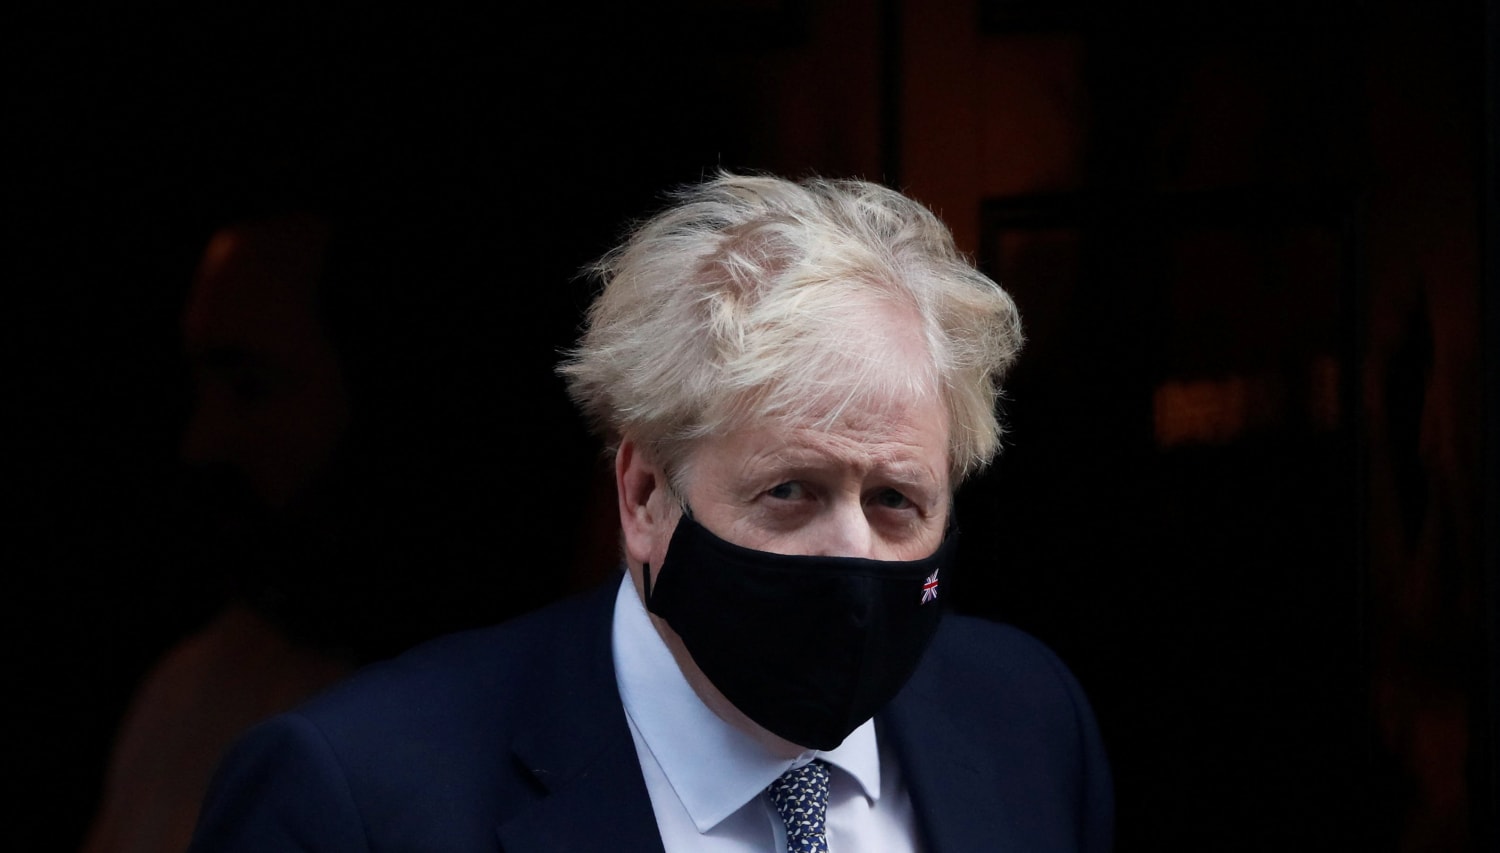 Party over for Boris Johnson? U.K. leader fighting to save his job over BYOB scandal